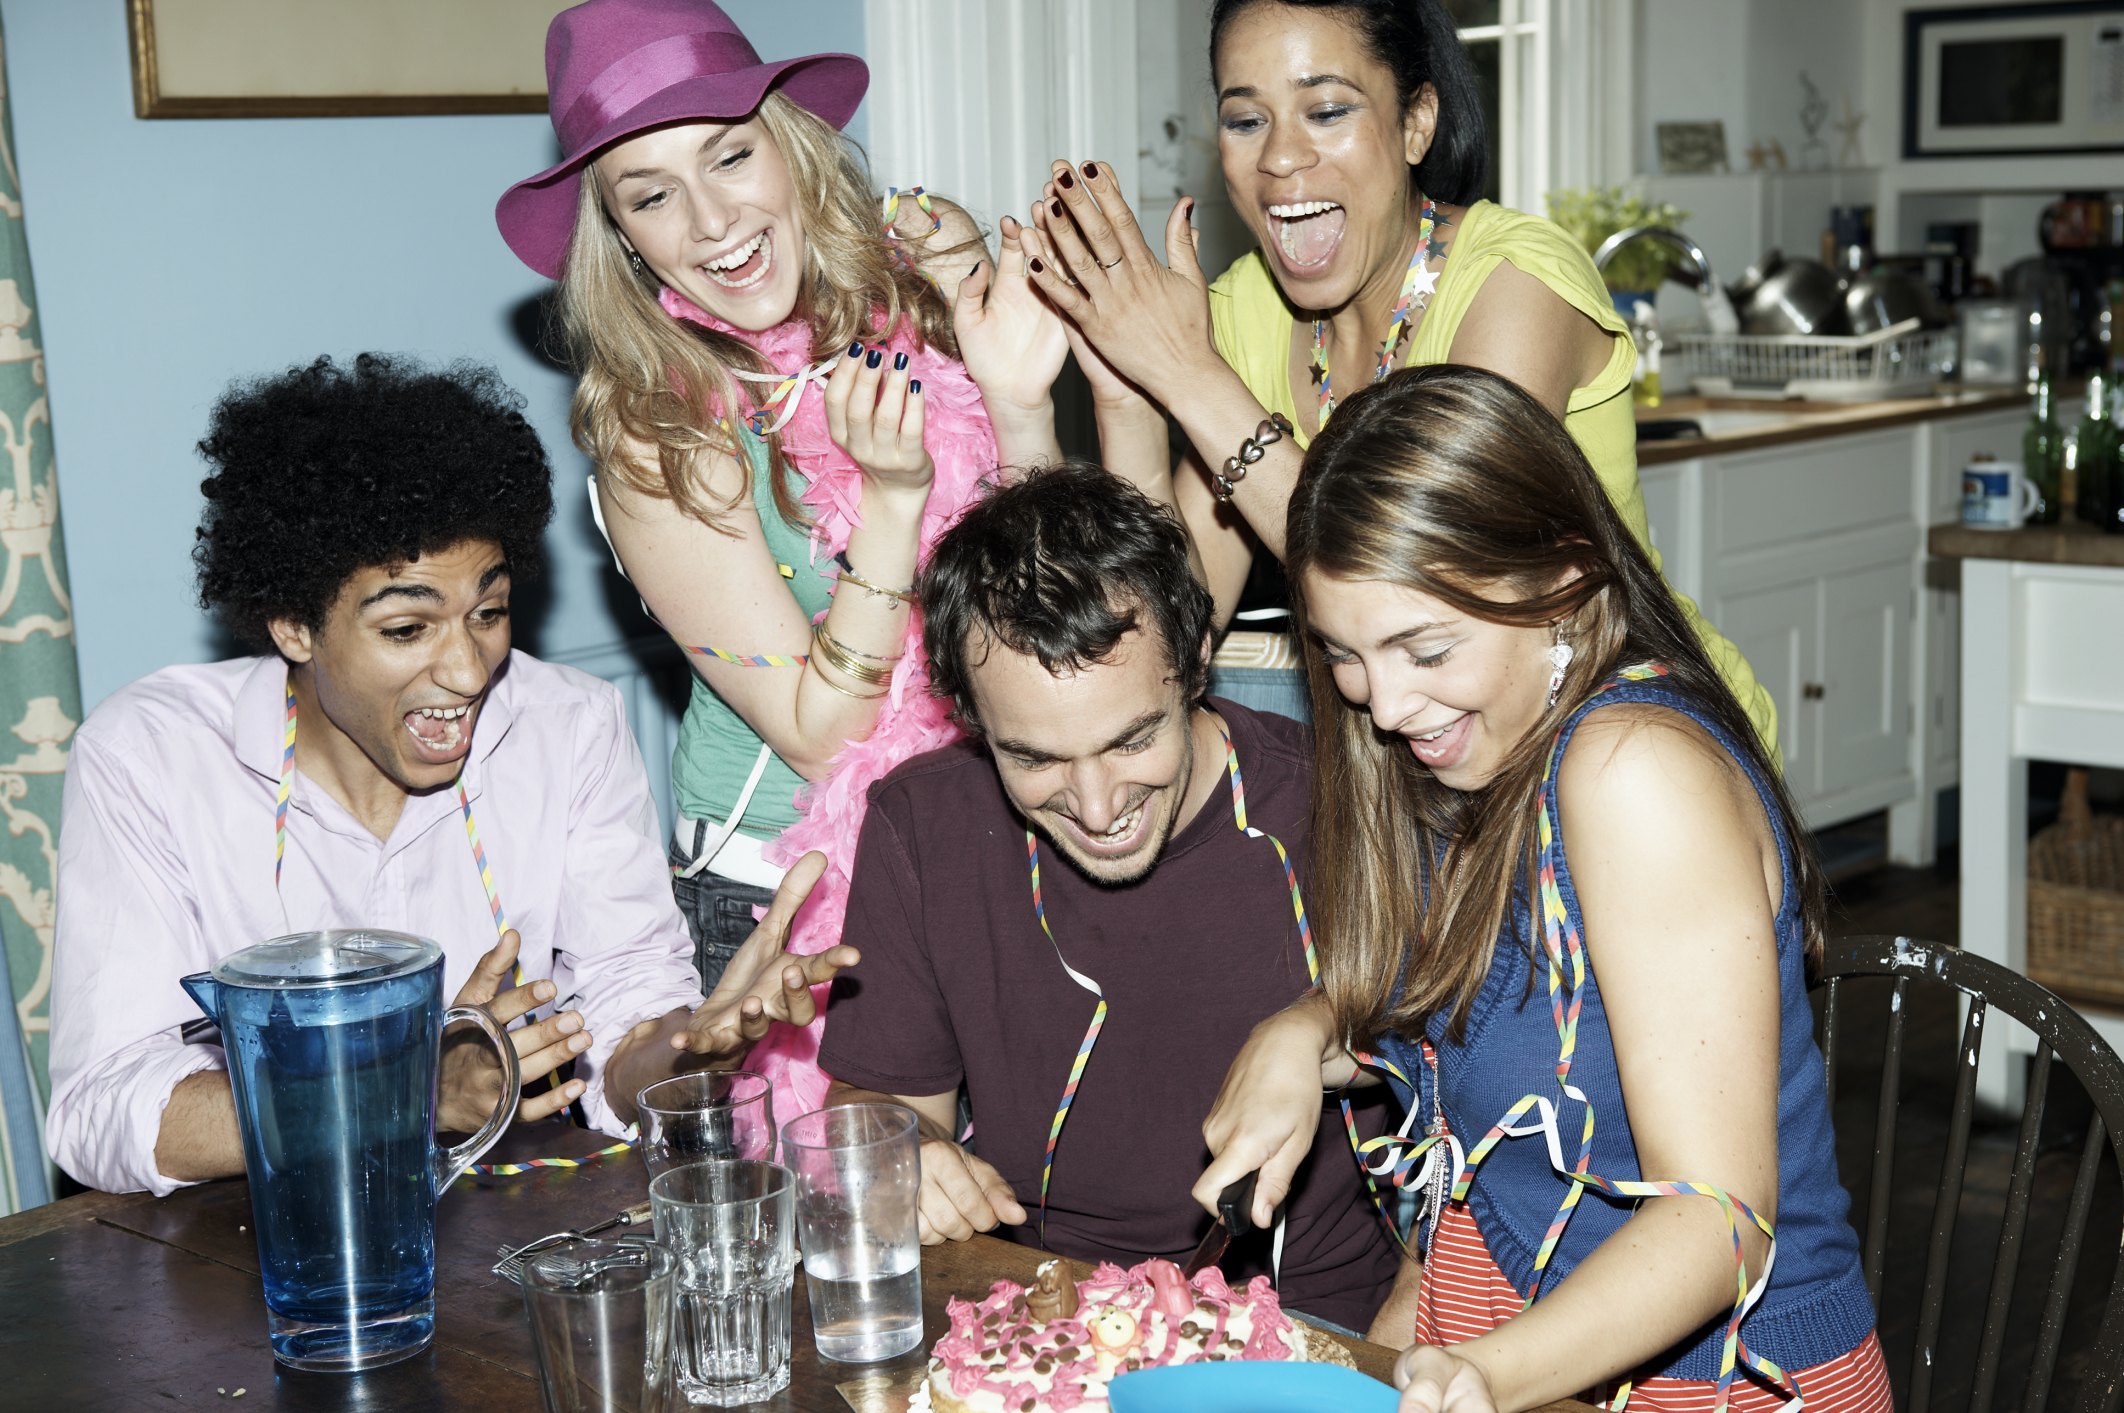 Things to Do on Your 23rd Birthday (with Pictures) | eHow